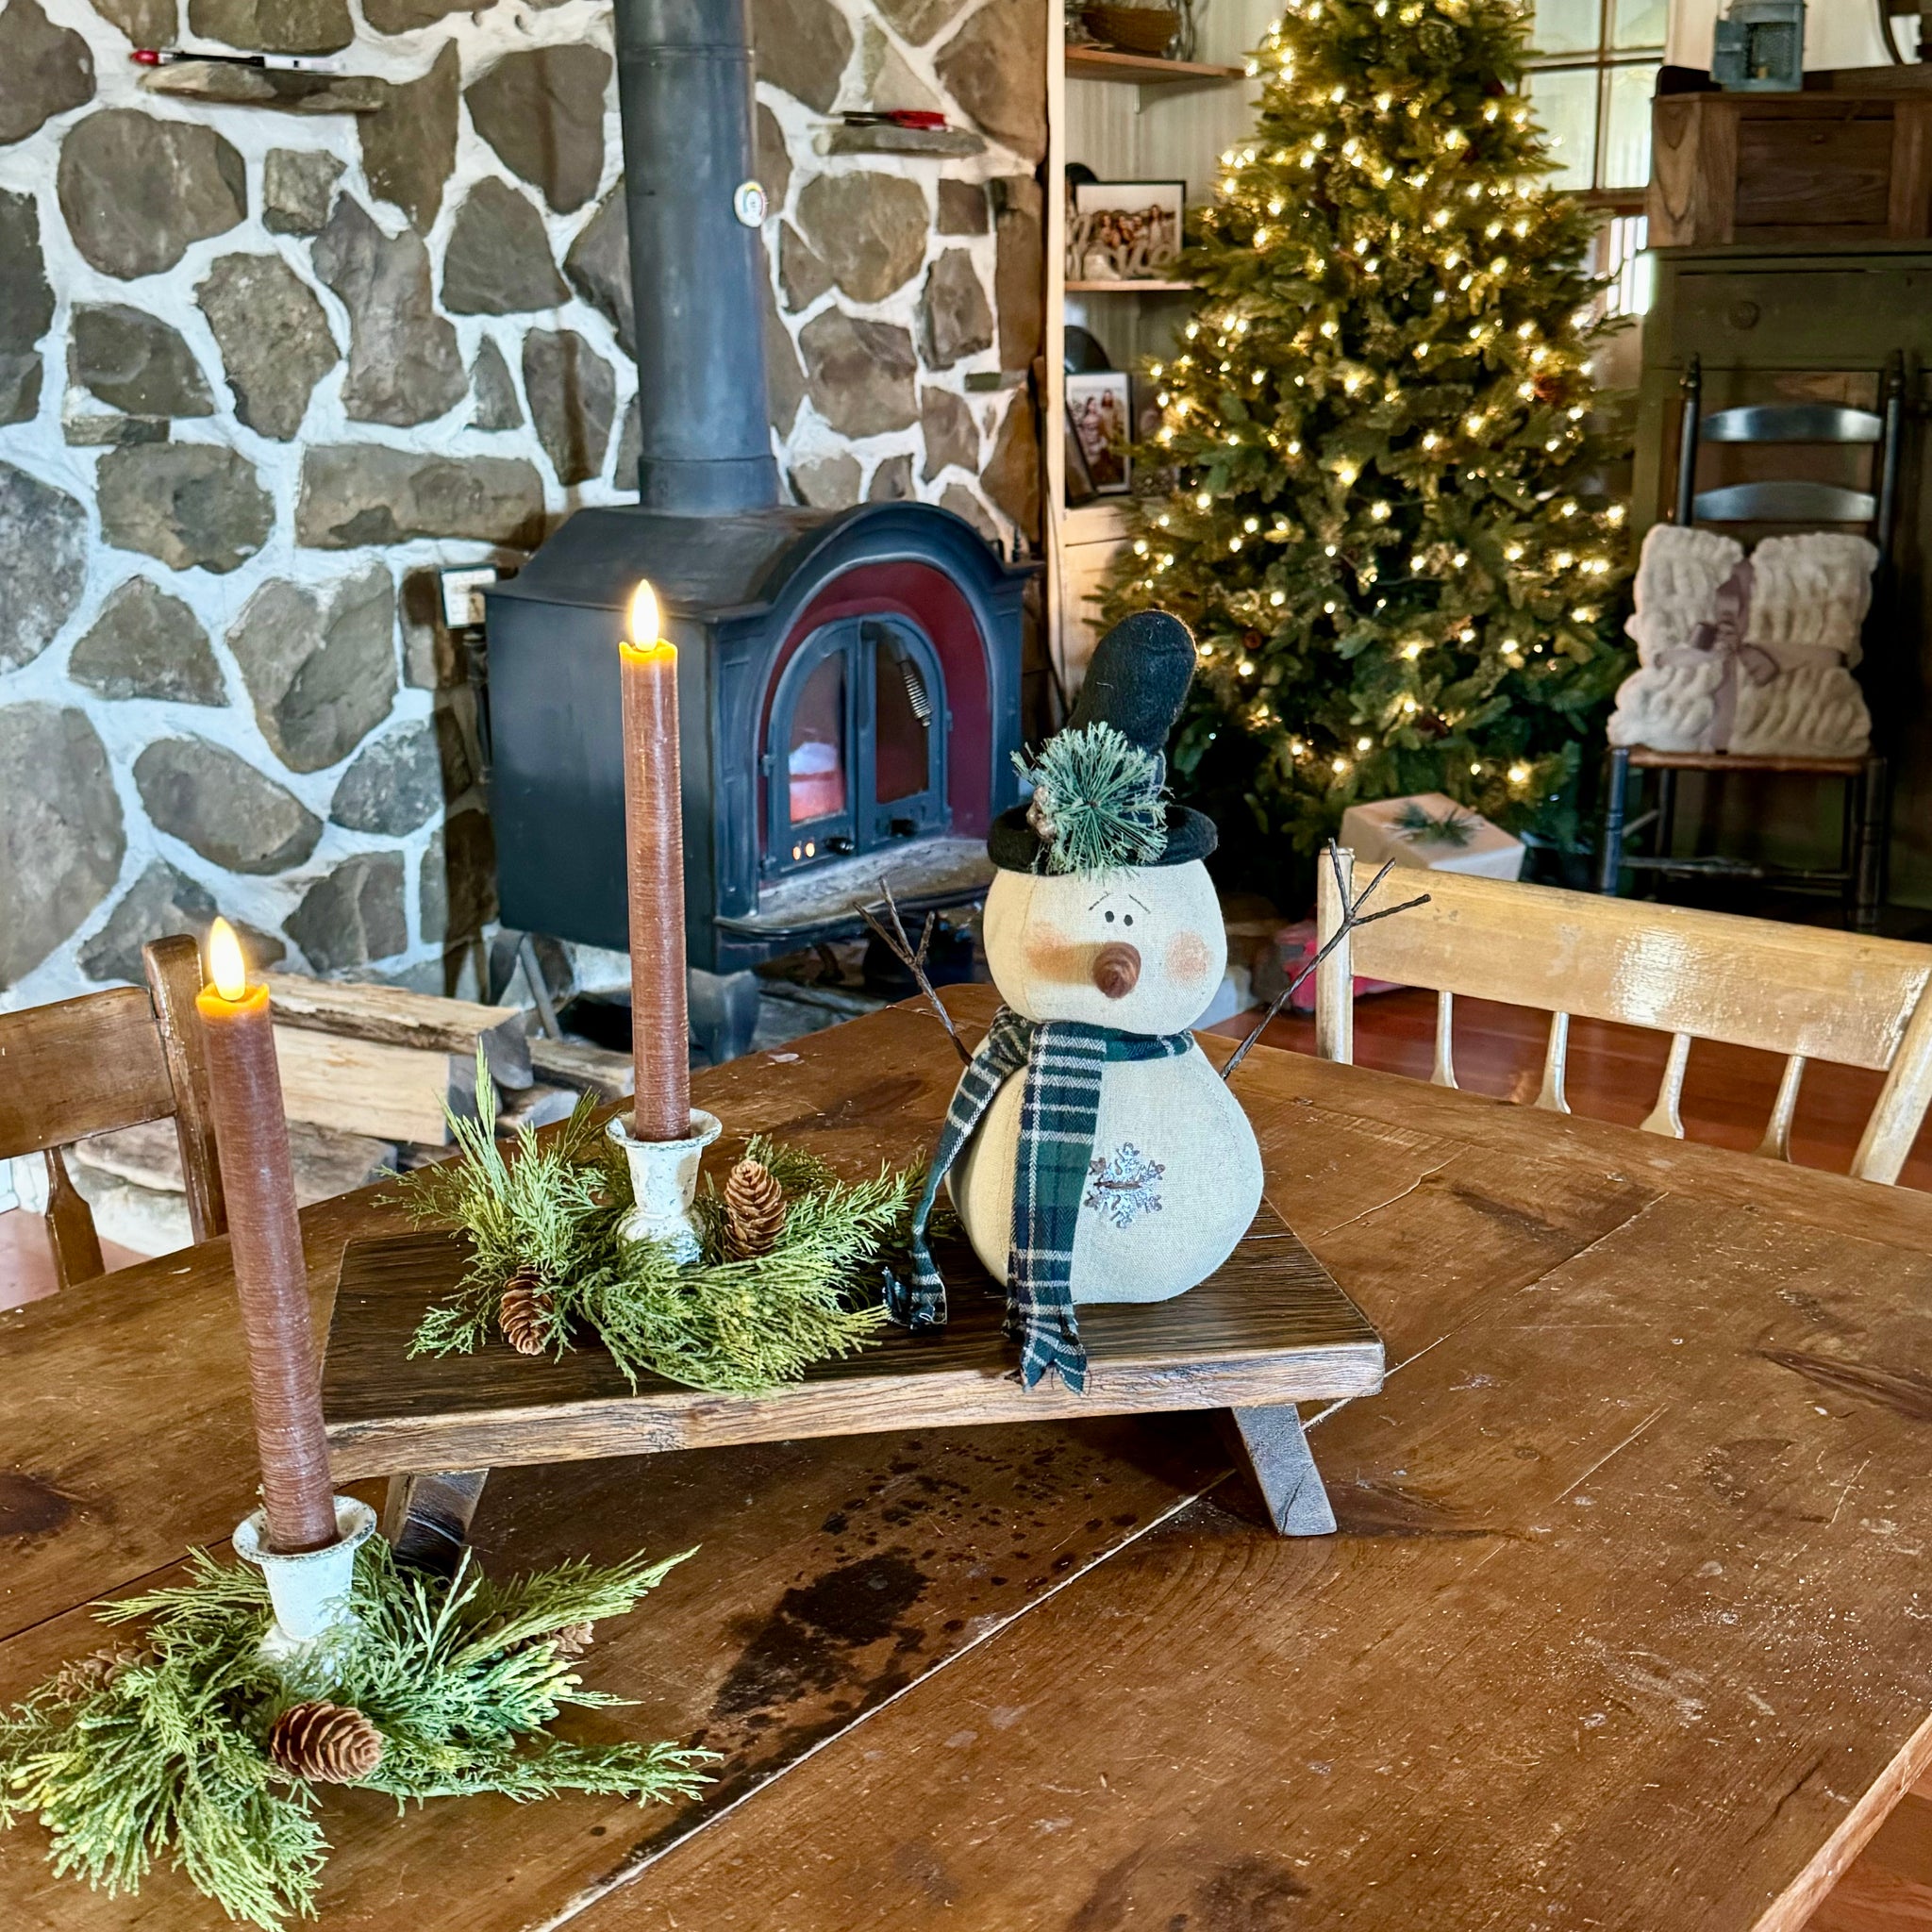 Rustic Brown Table Riser - FREE Candle Ring Included - Limited Time!